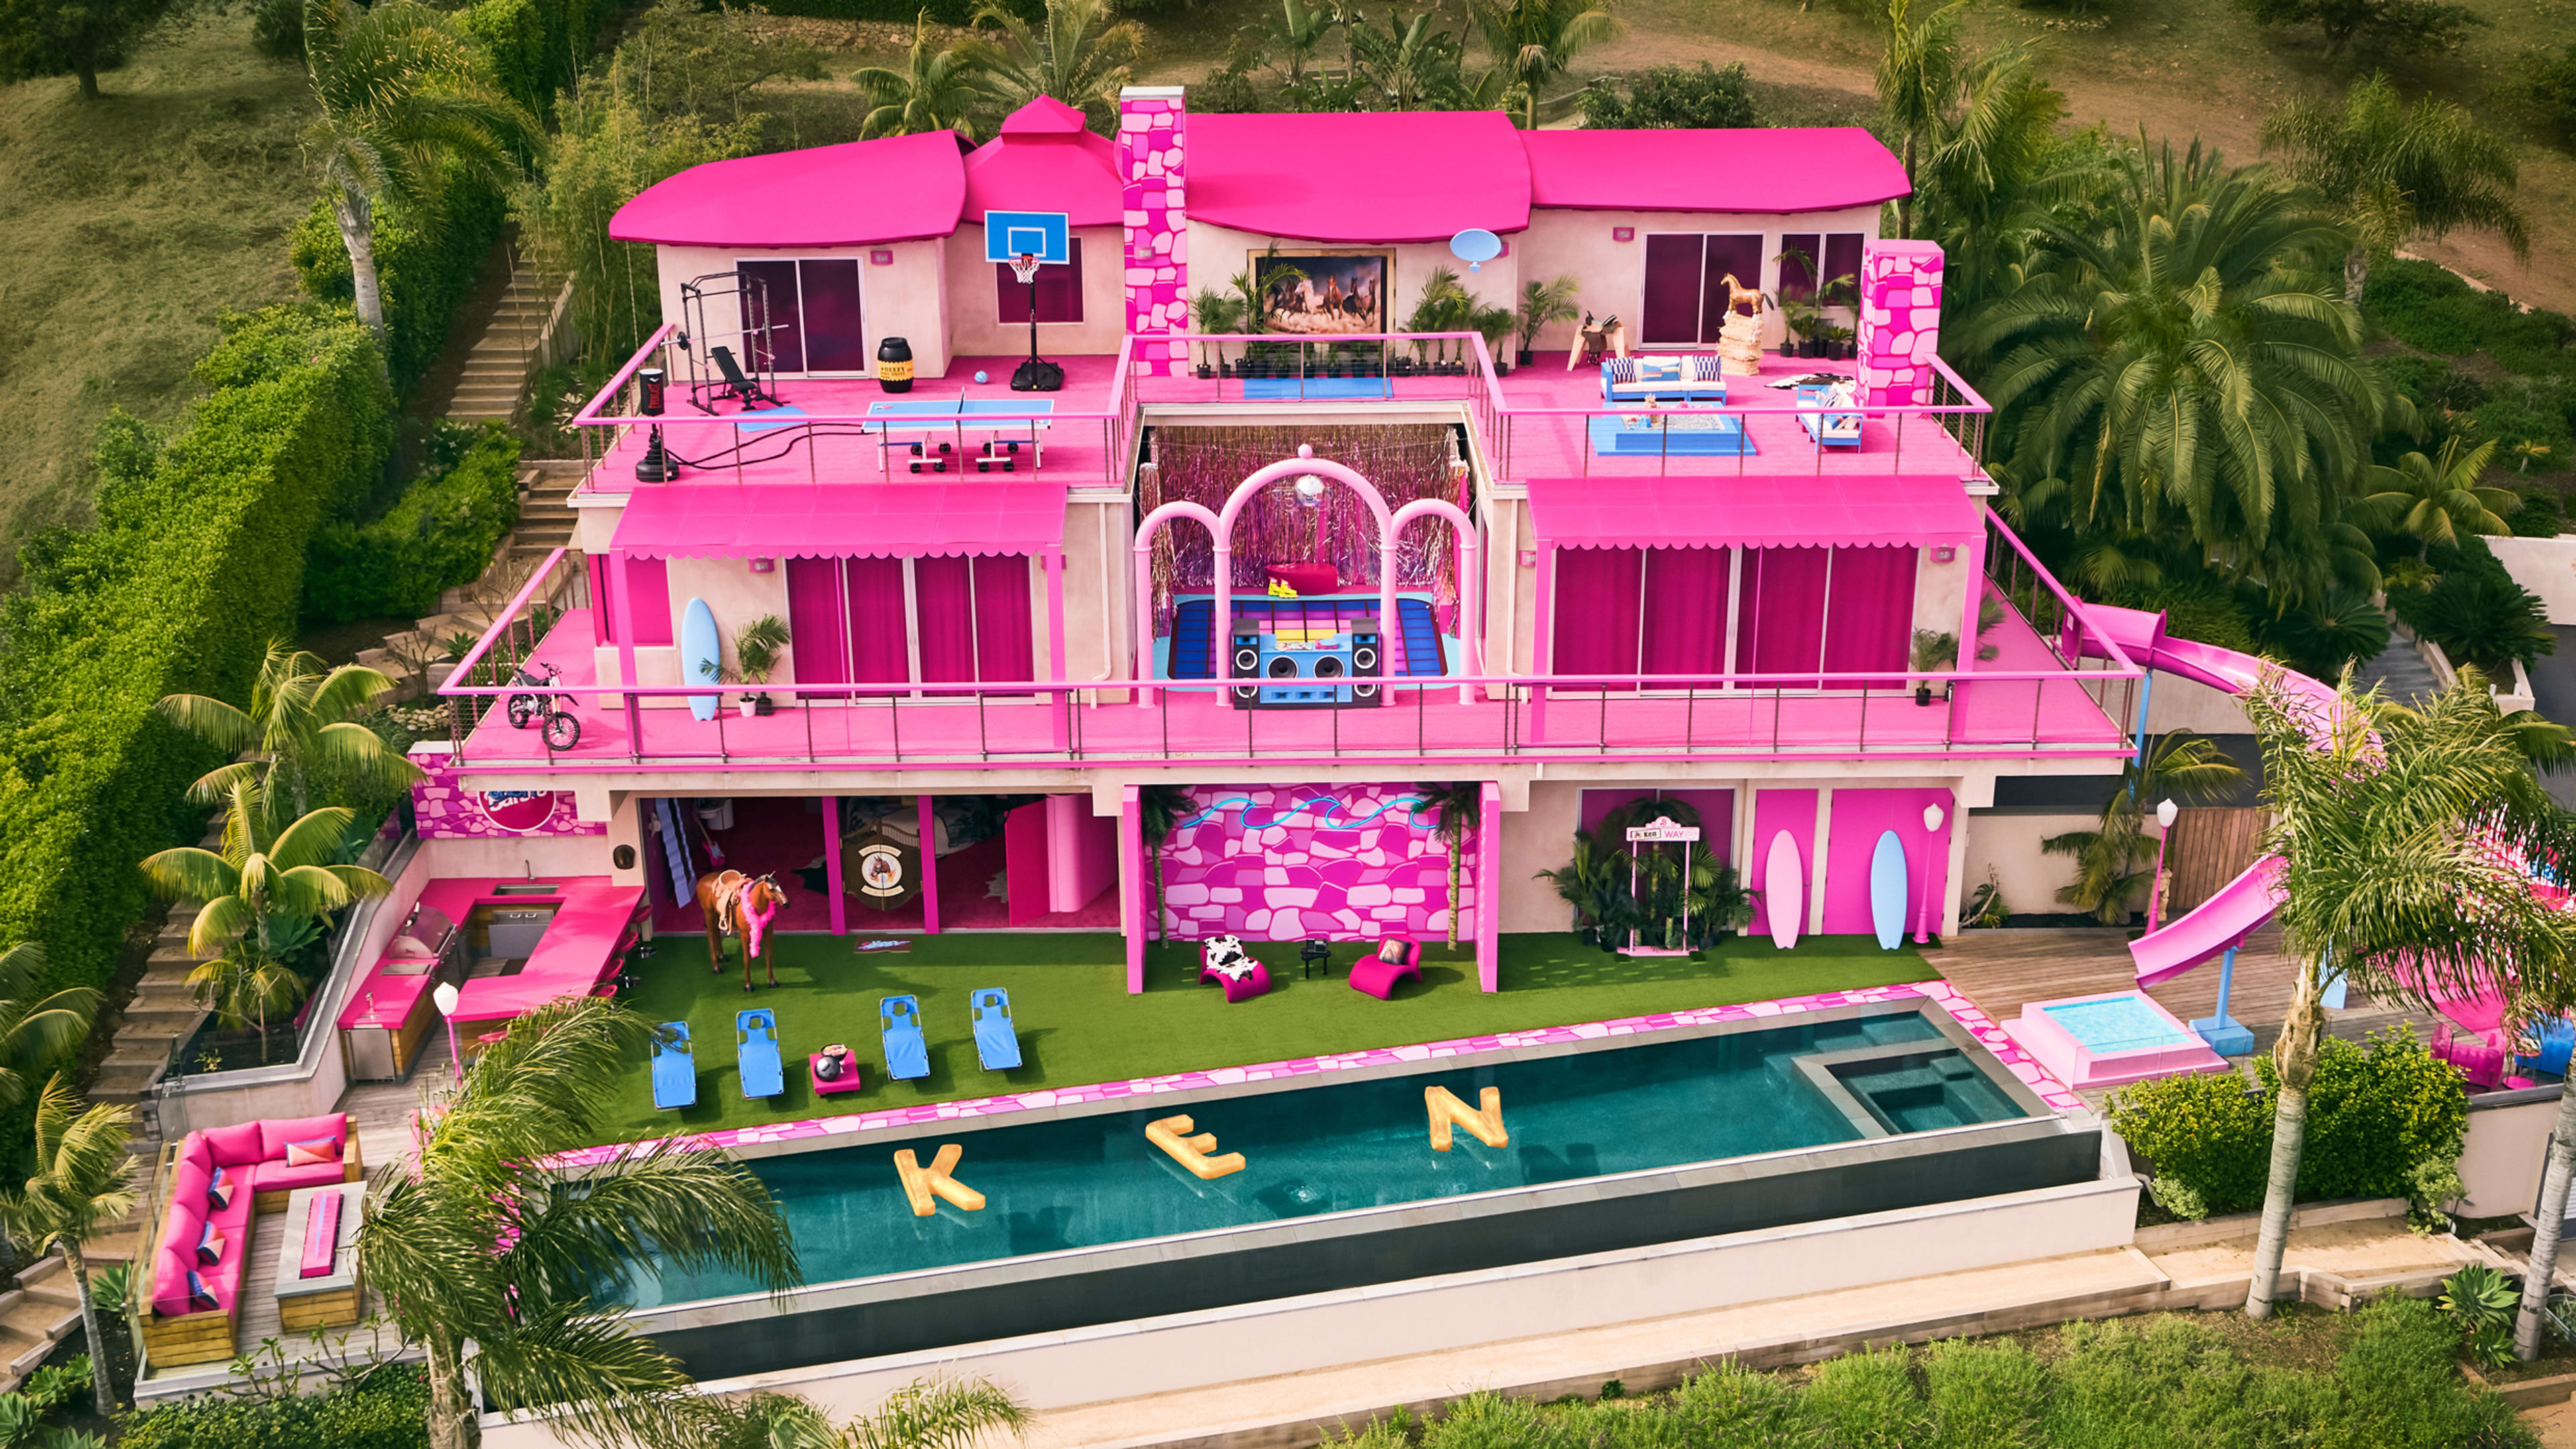 An expert in the uncanny explains why Barbie’s IRL DreamHouse is so creepy